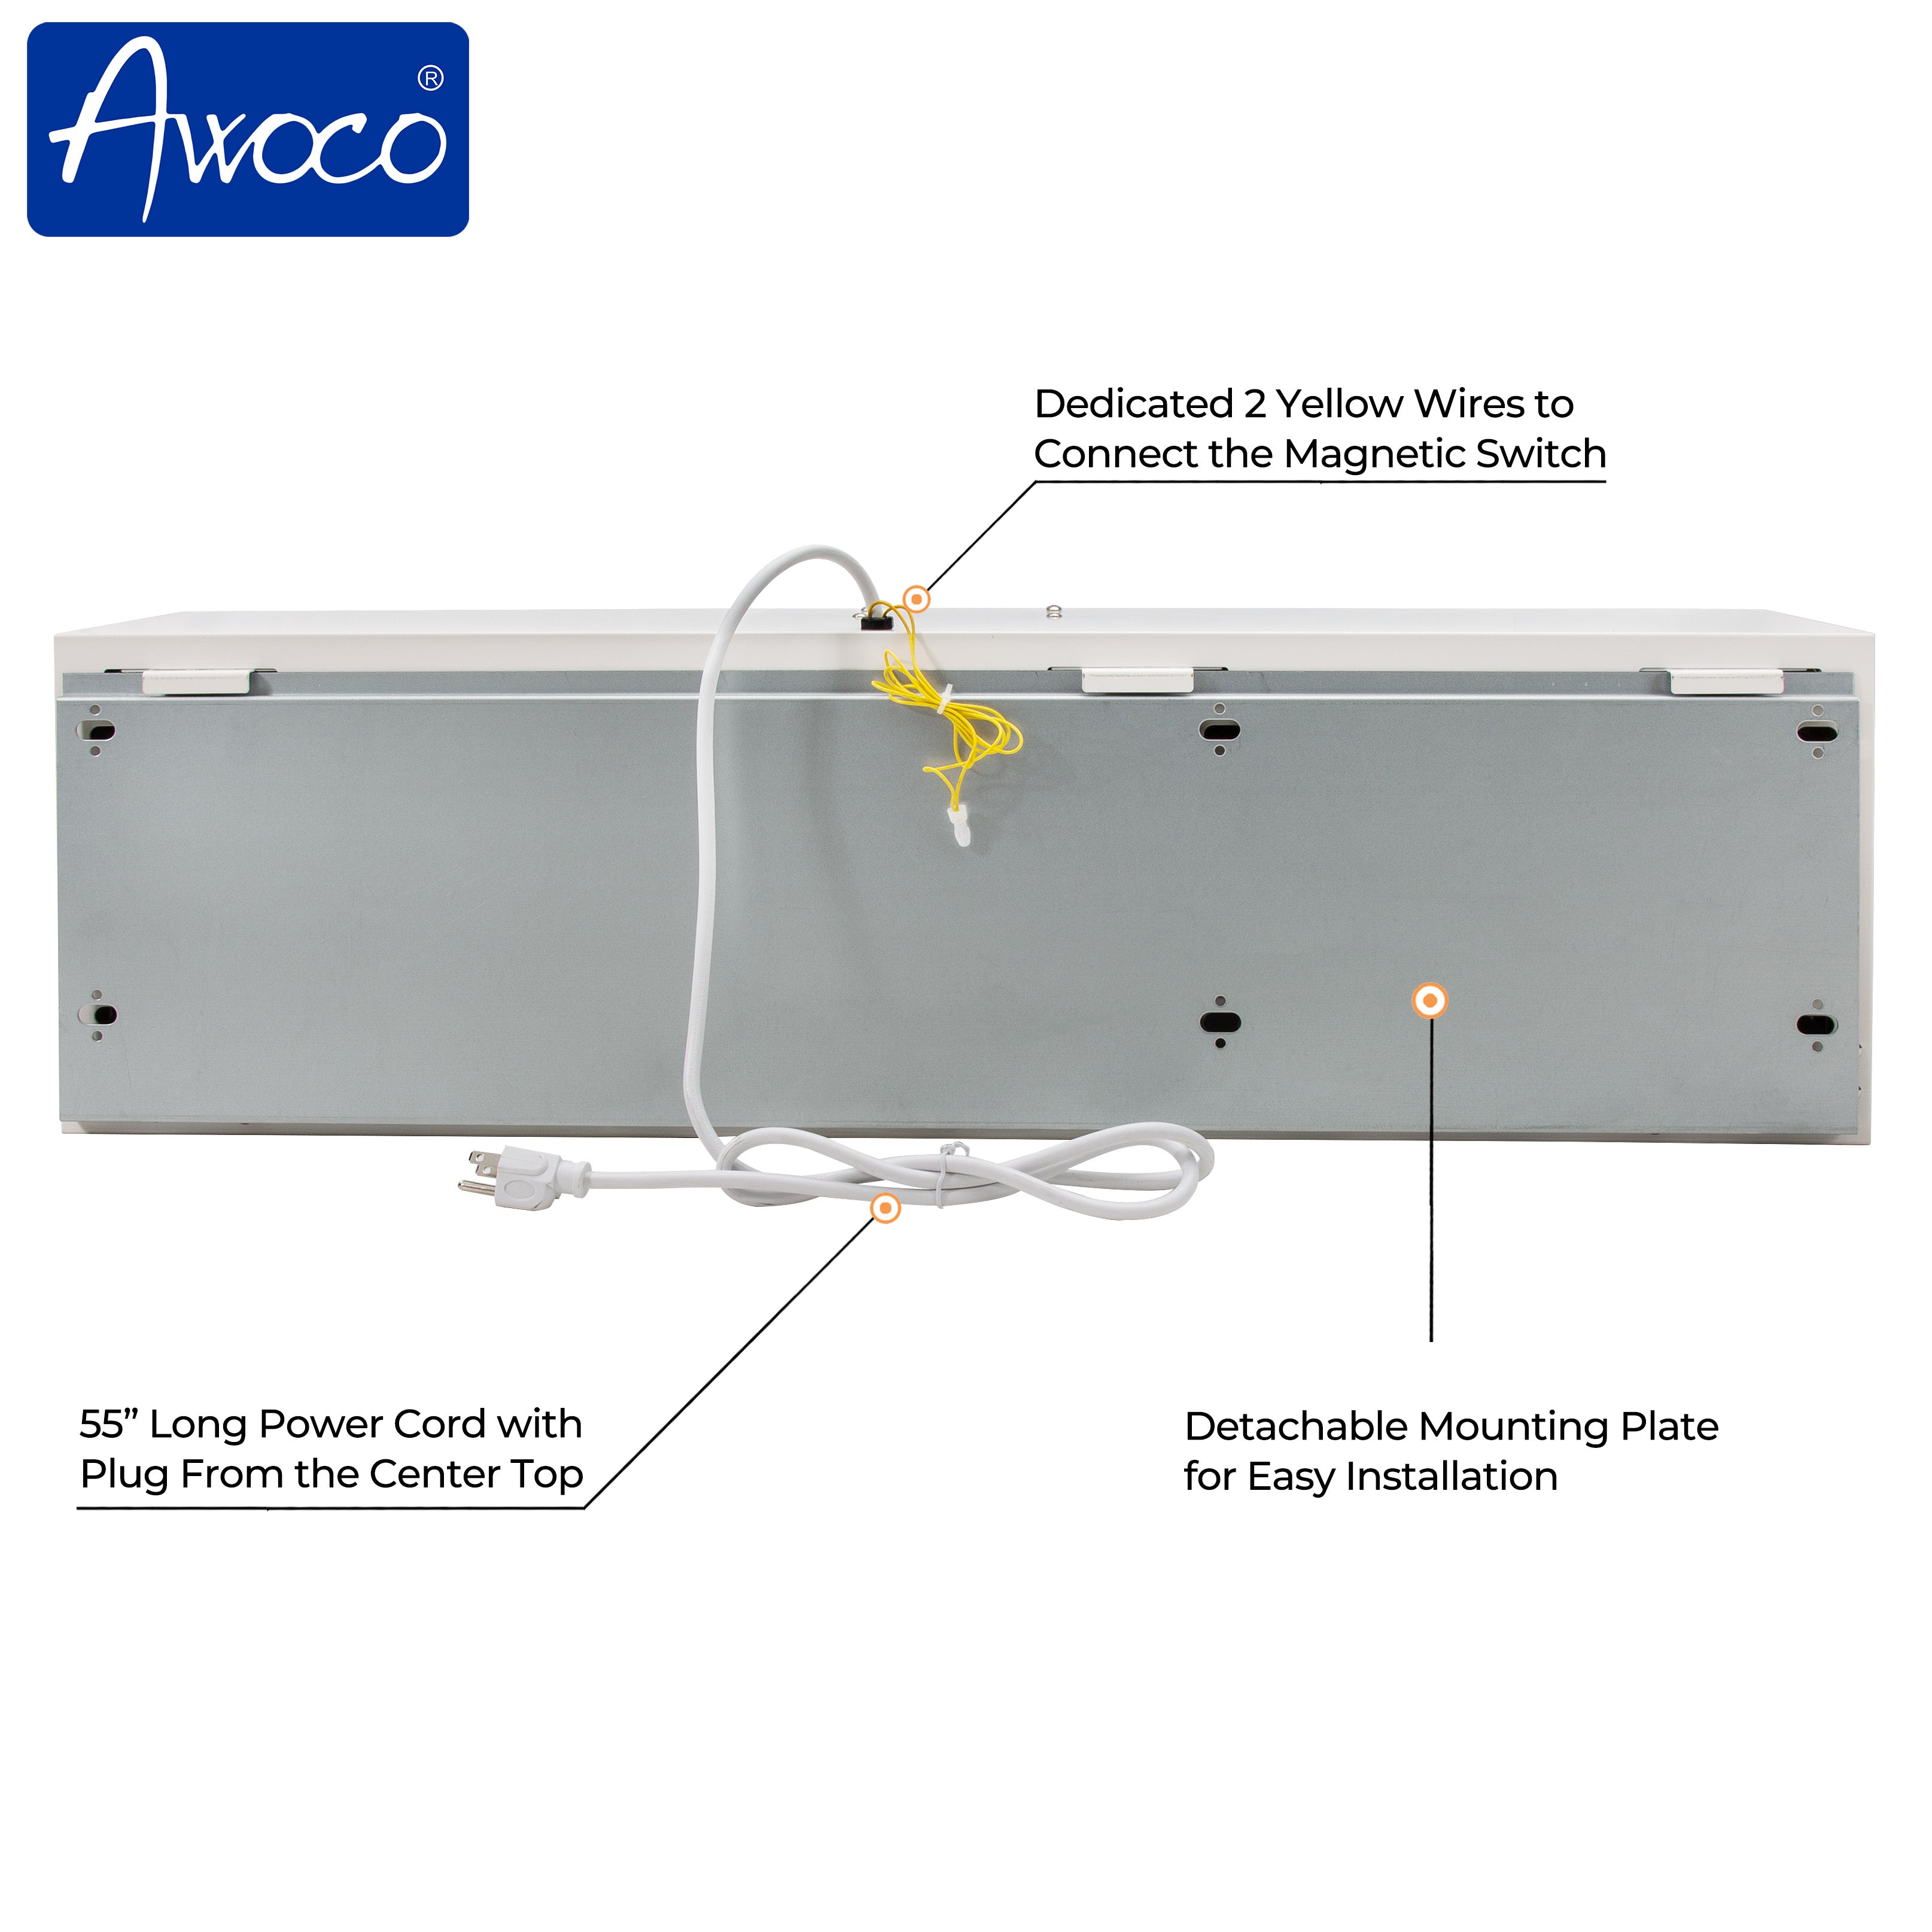 Awoco 60” Super Power 2 Speeds 2100 CFM Commercial Indoor Air Curtain, UL Certified, 120V Unheated with an Easy-Install Magnetic Switch